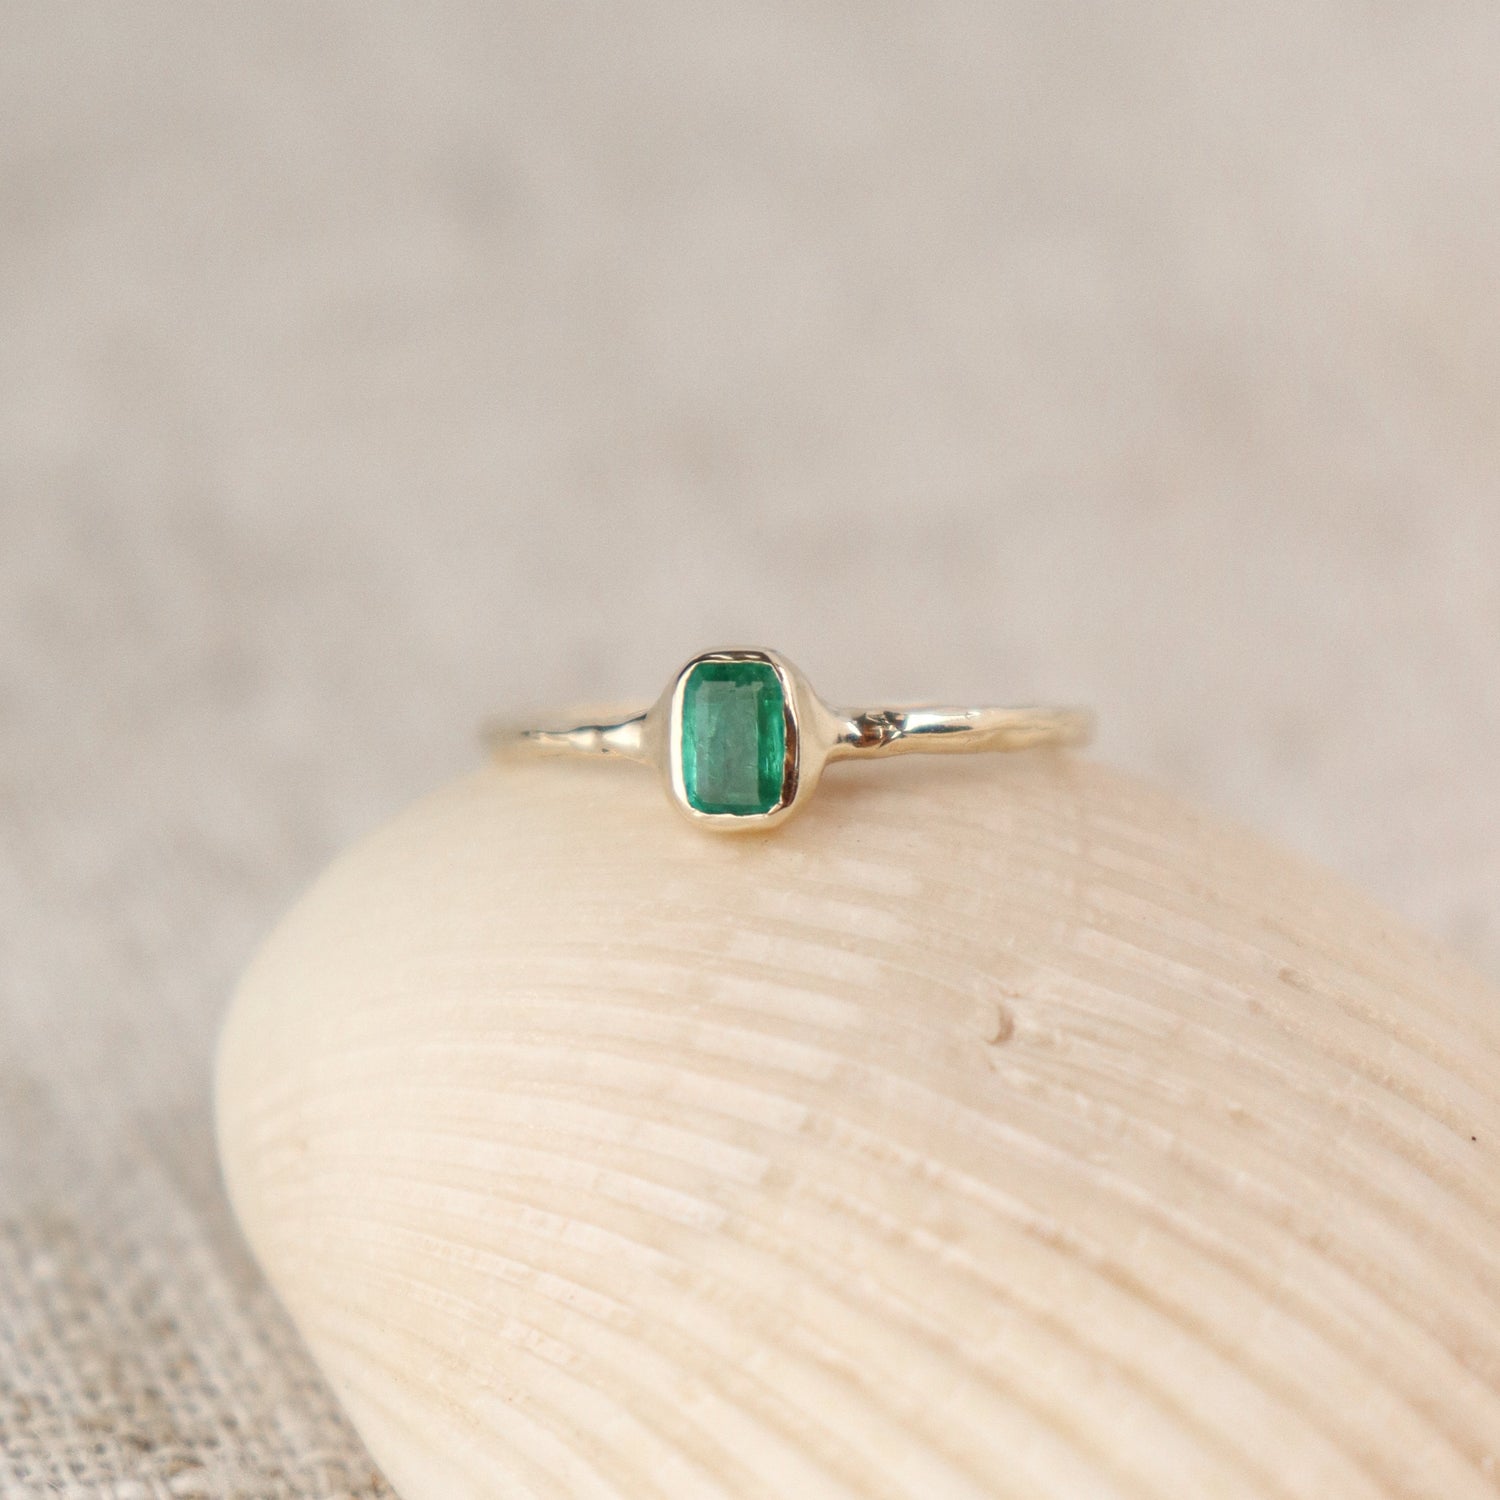 Mini emerald ring with a vibrant green gemstone bezel set in delicate gold band.